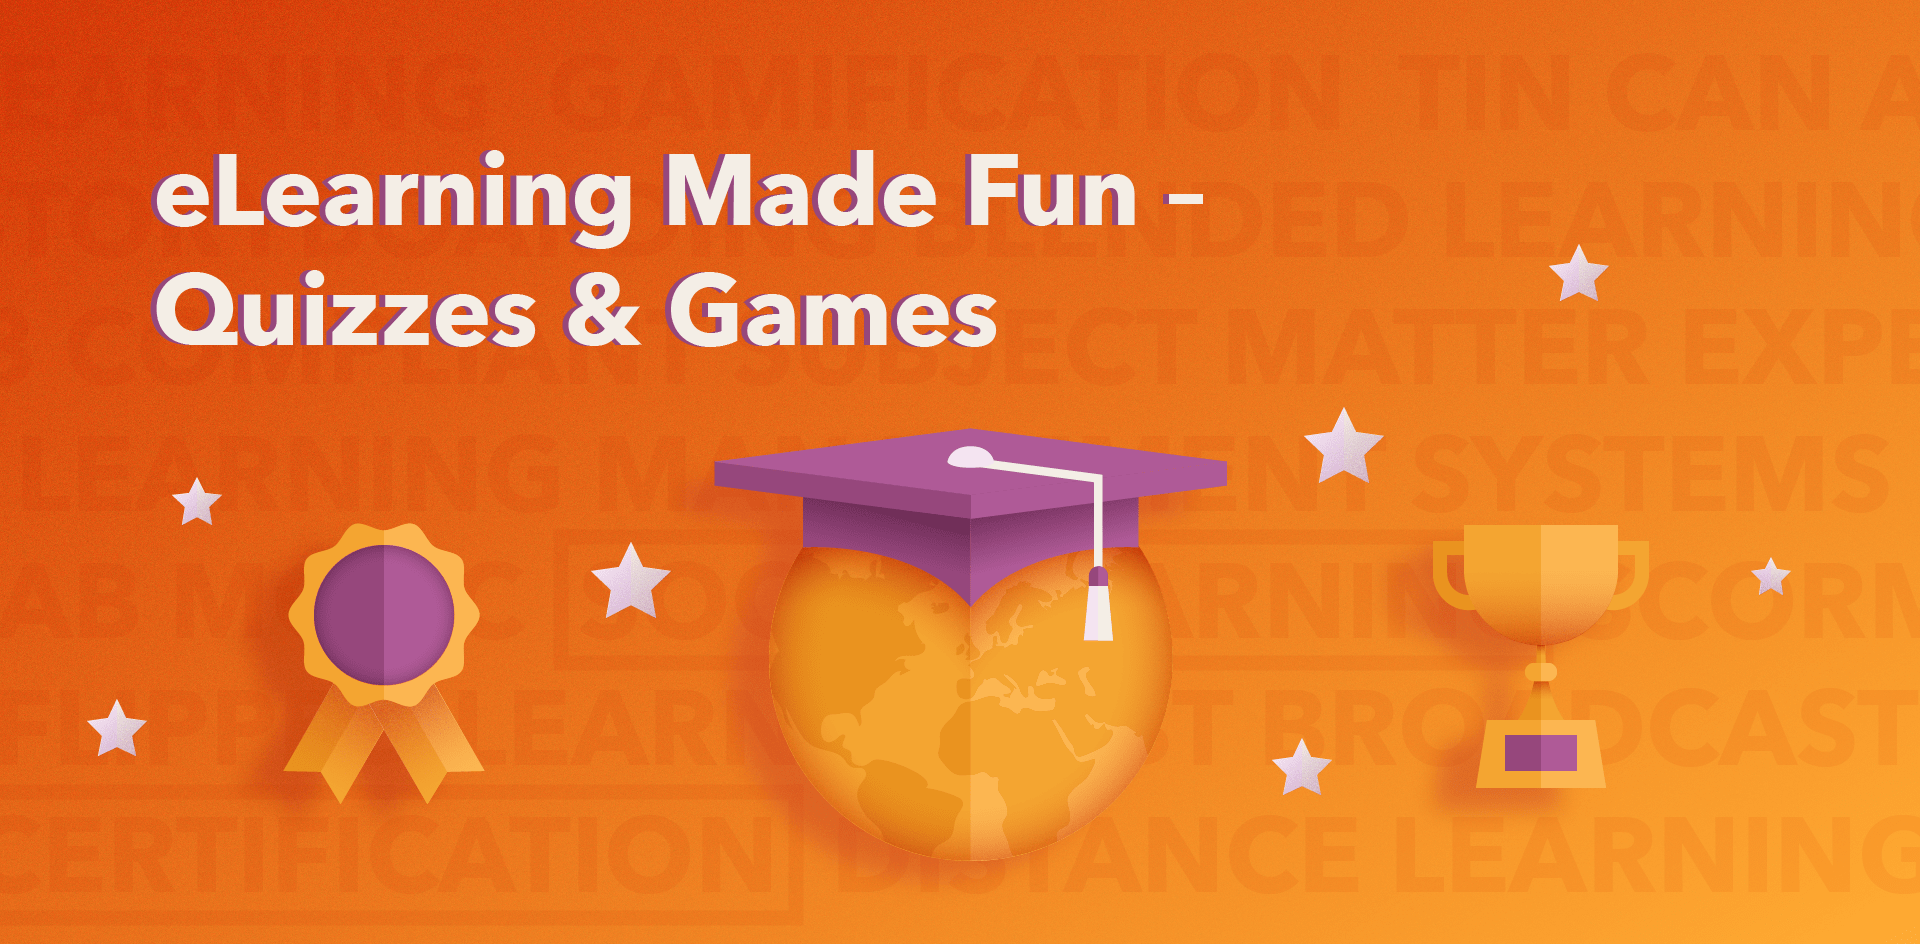 eLearning Made Fun - Quizzes and Games